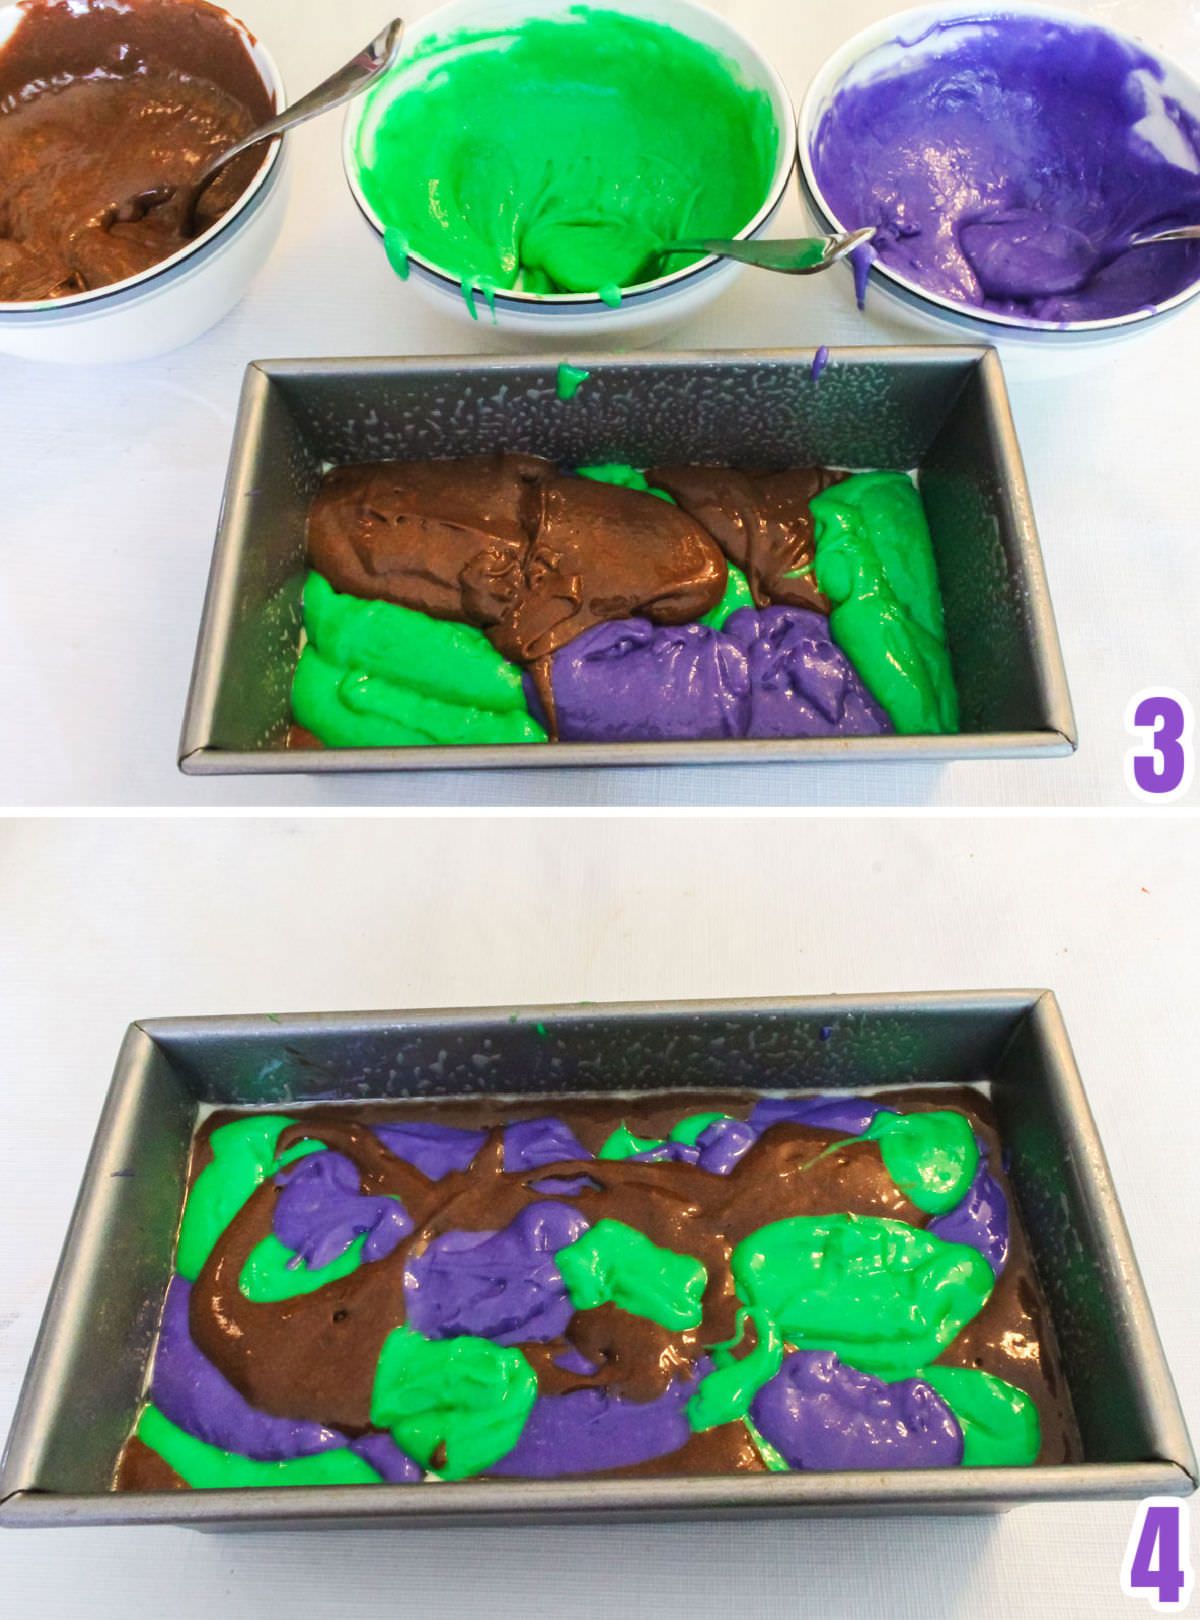 Collage image showing the steps required to create the marbling effect for the Halloween Cake.